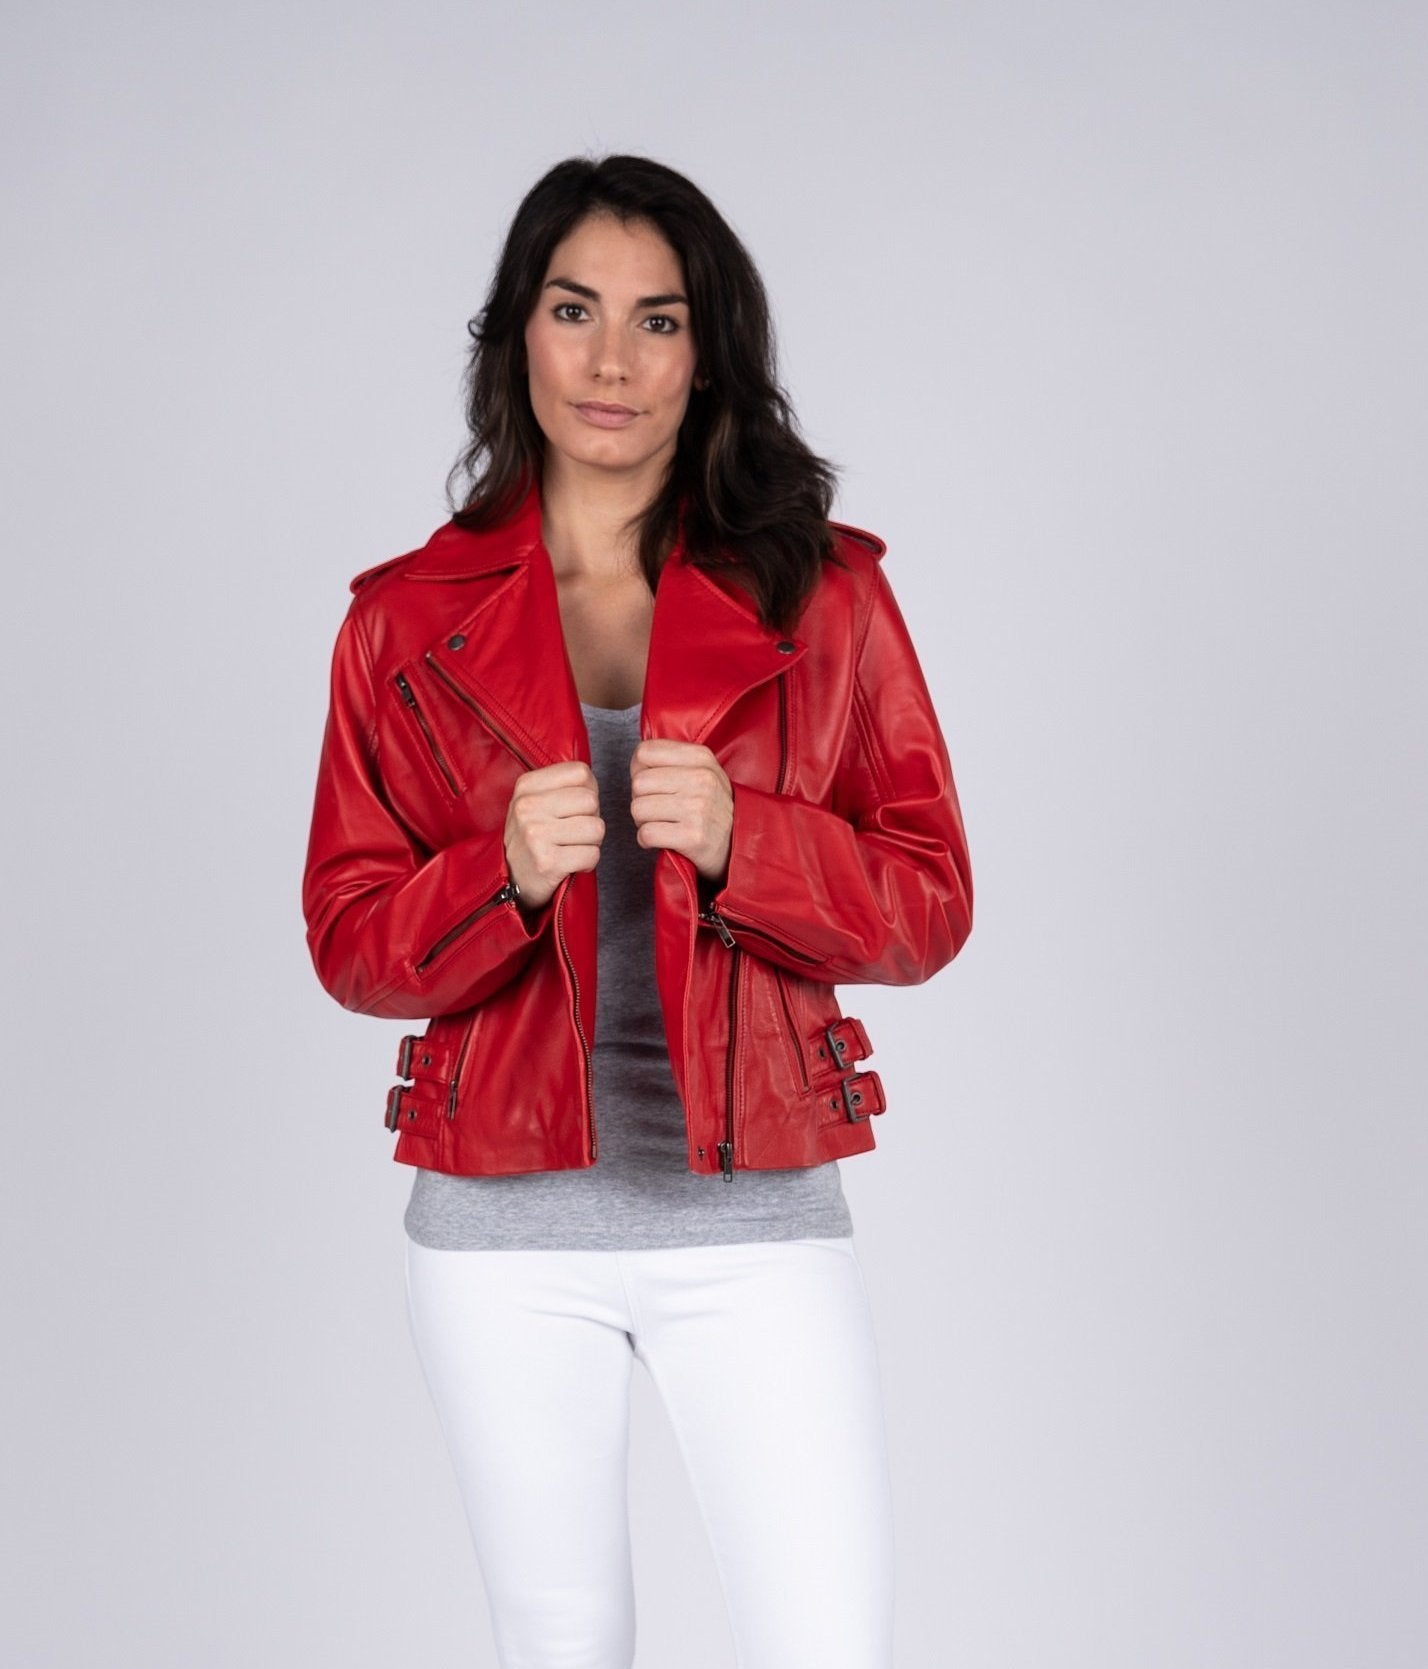 Ava Womens Leather Jacket, Red - Fadcloset